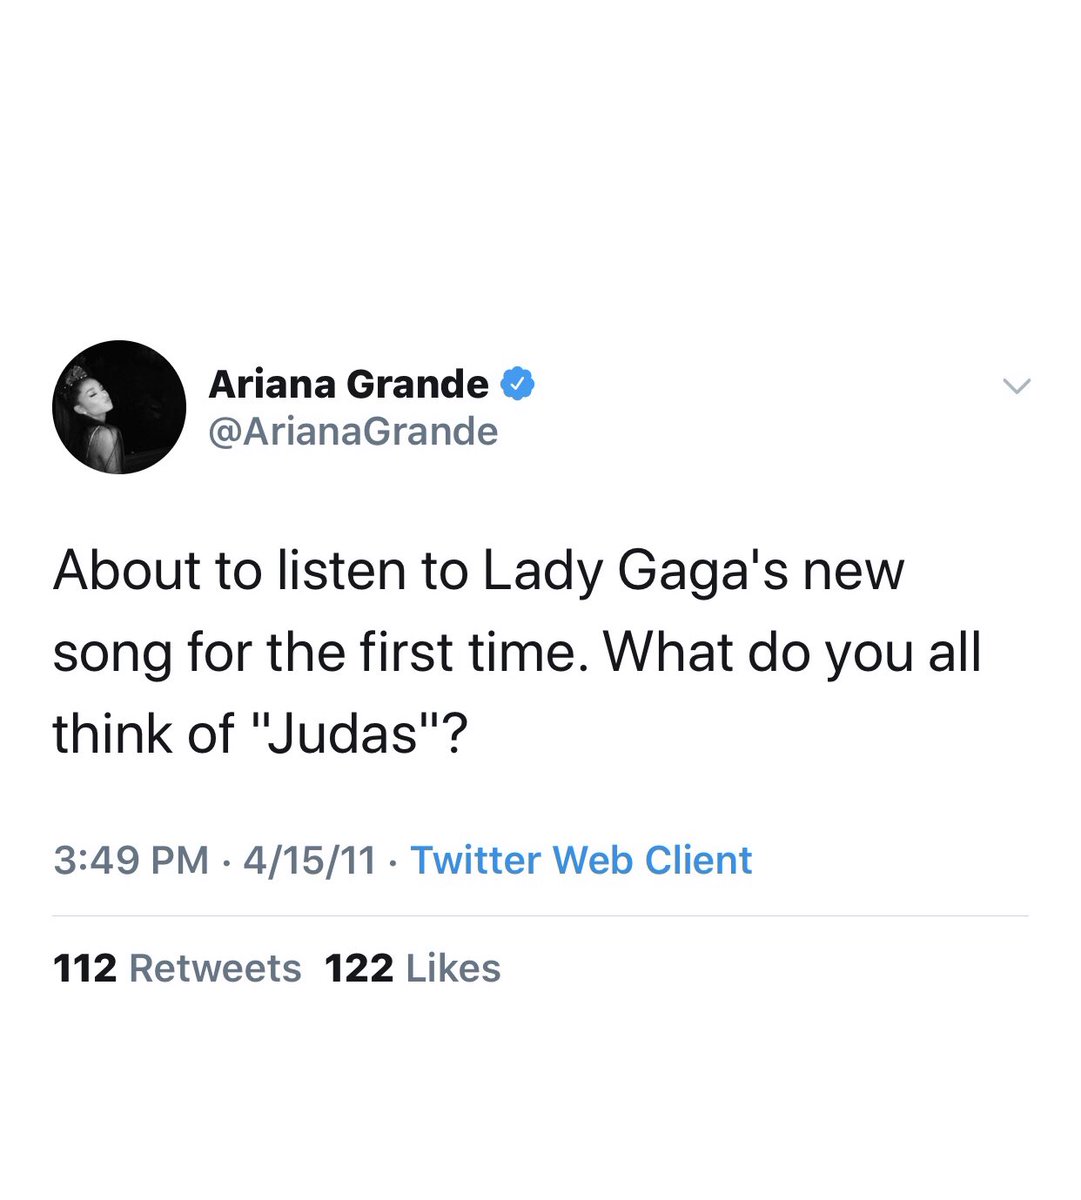 She took to Twitter right before listening to “Judas” for the first time as well